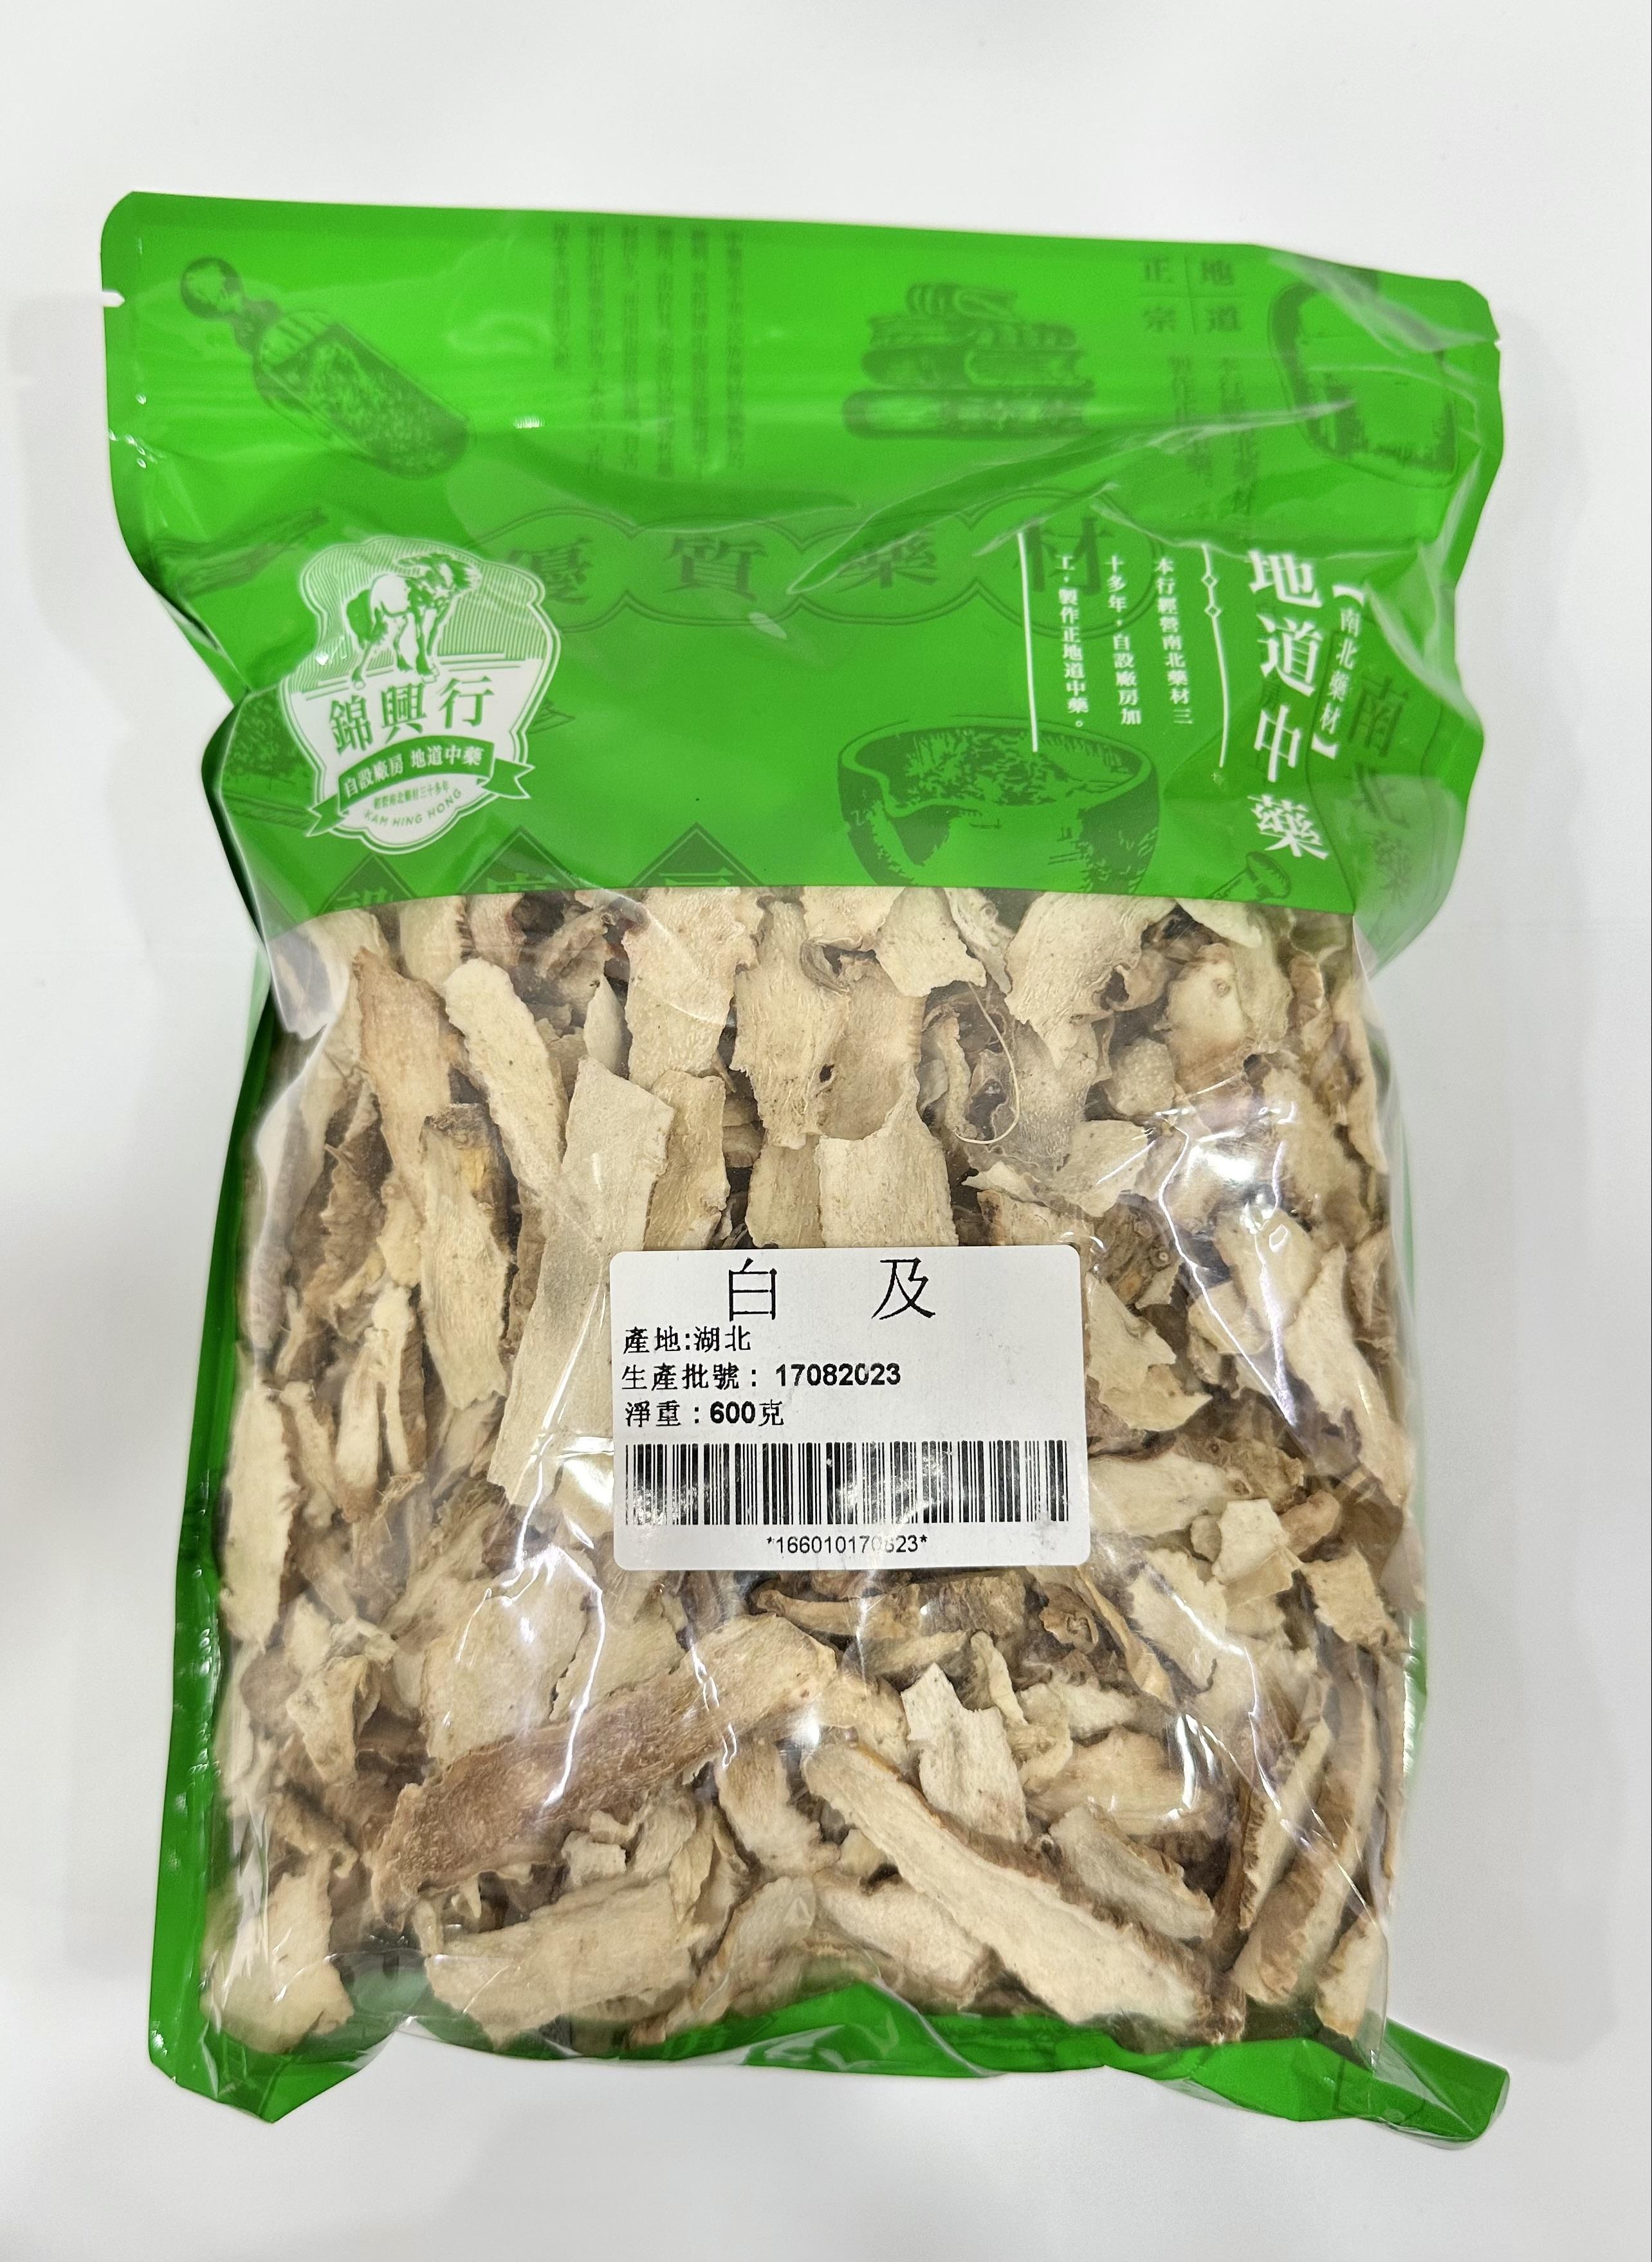 The Department of Health today (November 3) endorsed a licensed Chinese herbal medicines wholesaler, Kam Hing Hong Limited, to voluntarily recall from the market one batch of herbal medicine labelled as “Rhizoma Bletillae” (batch number: 17082023), as it is not Rhizoma Bletillae after identification. Photo shows the herbal medicine labelled as “Rhizoma Bletillae”.